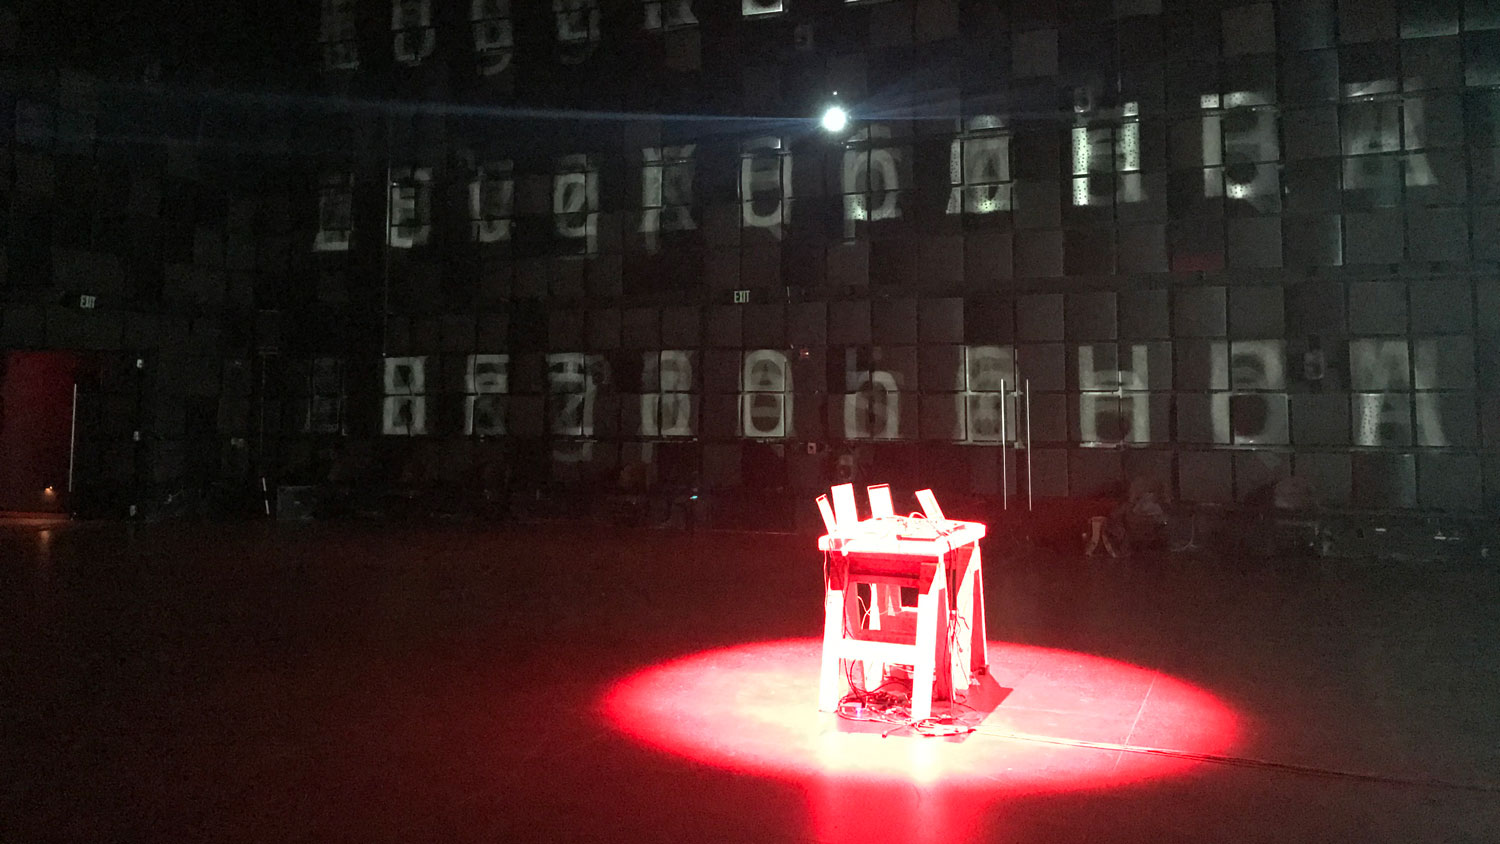 a table bathed in red with letters projected on the walls